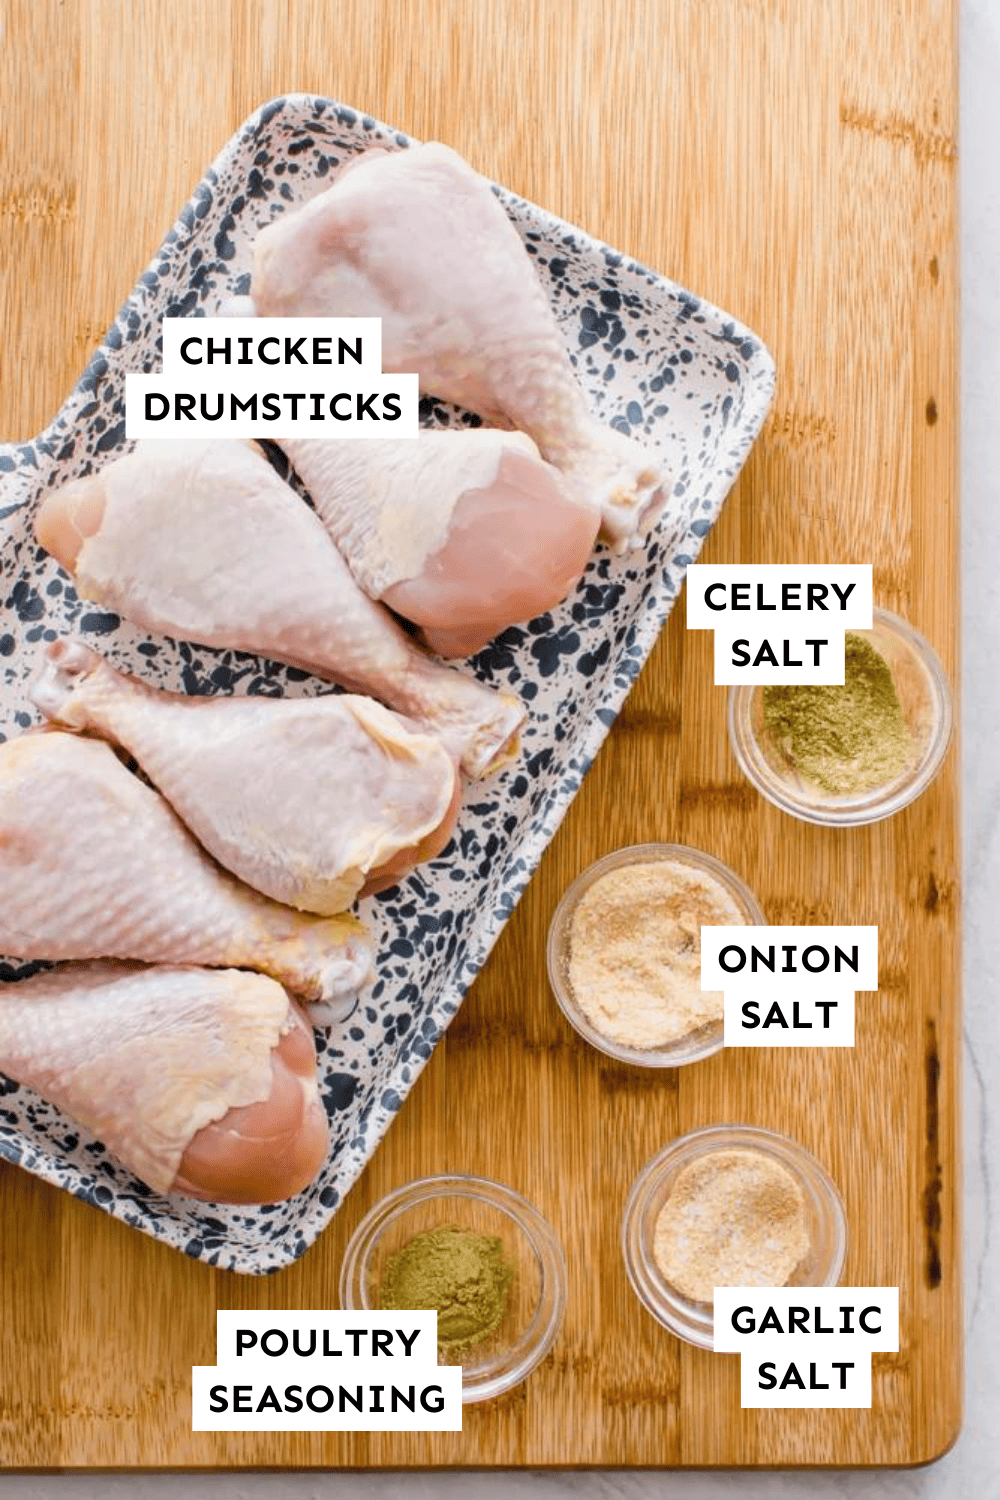 Ingredients for Instant Pot chicken drumsticks measured out and labeled.